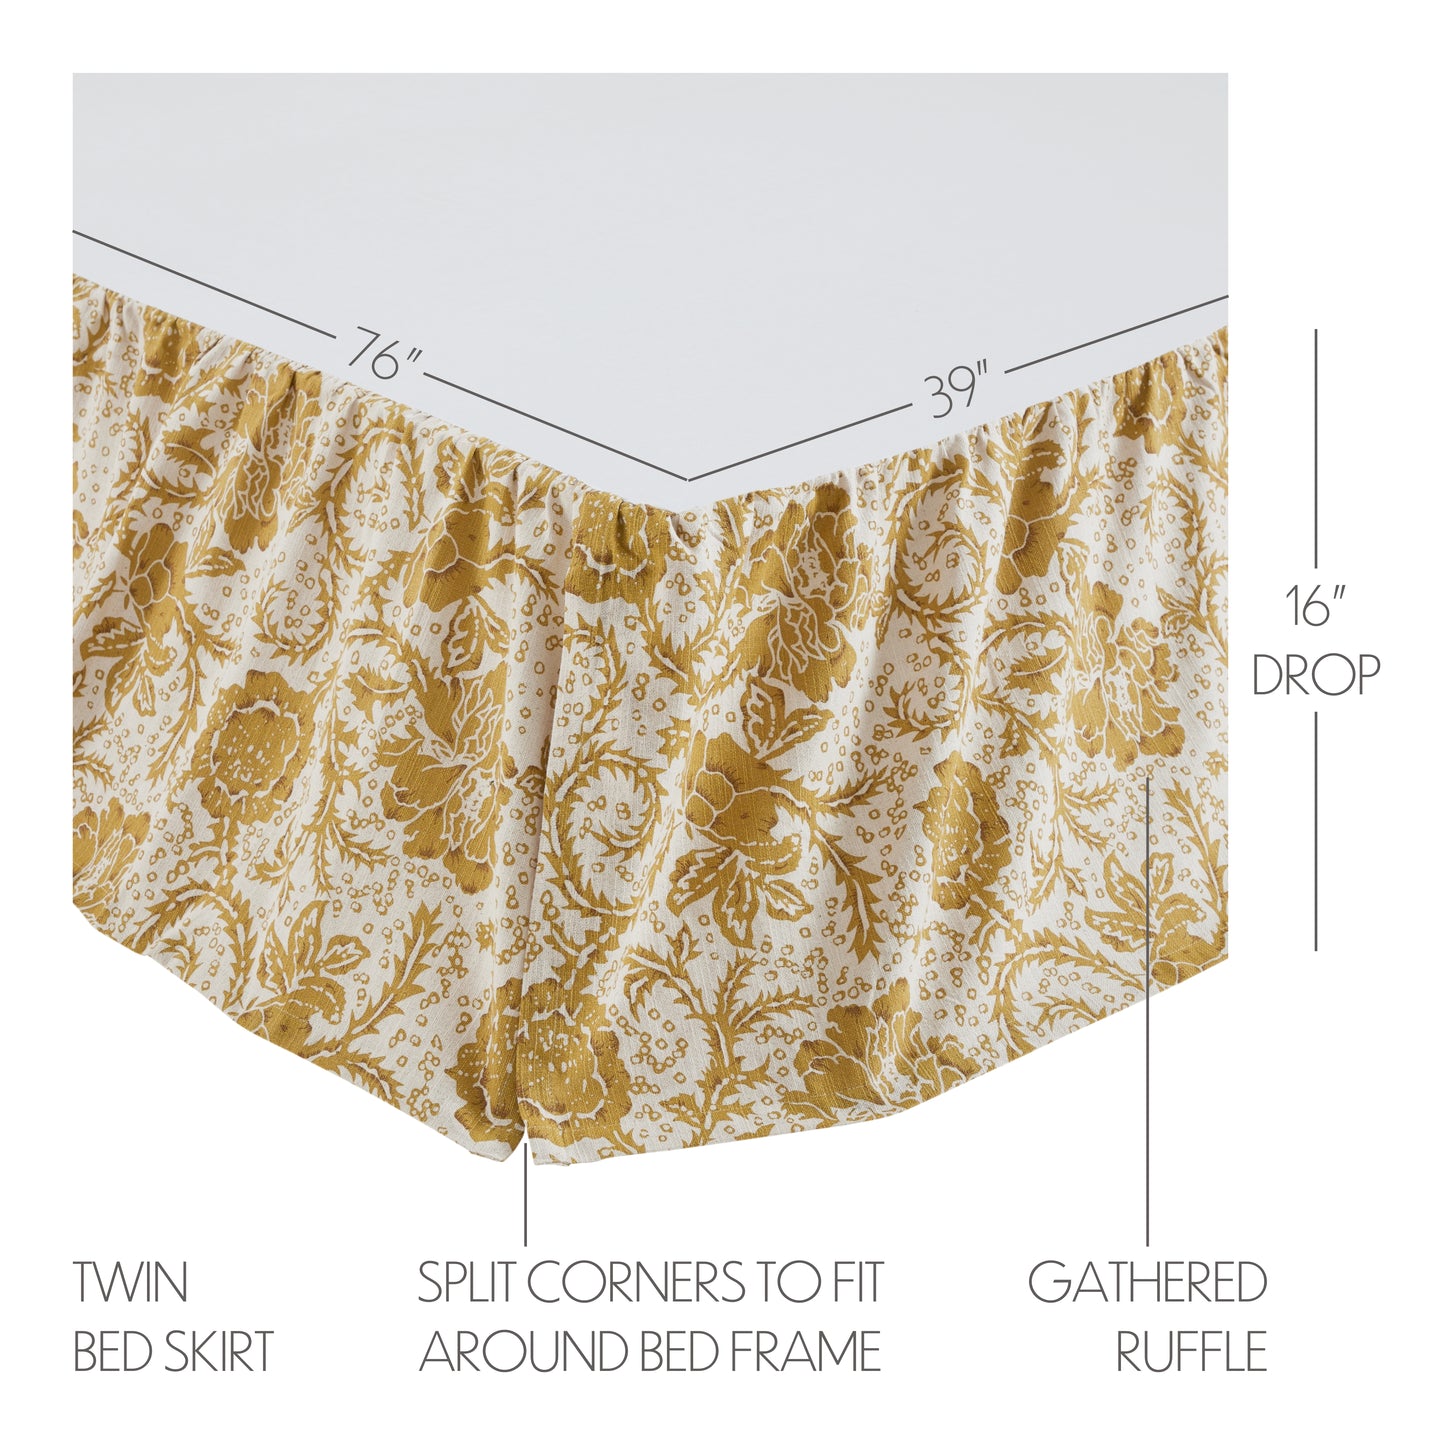 81191-Dorset-Gold-Floral-Twin-Bed-Skirt-39x76x16-image-1